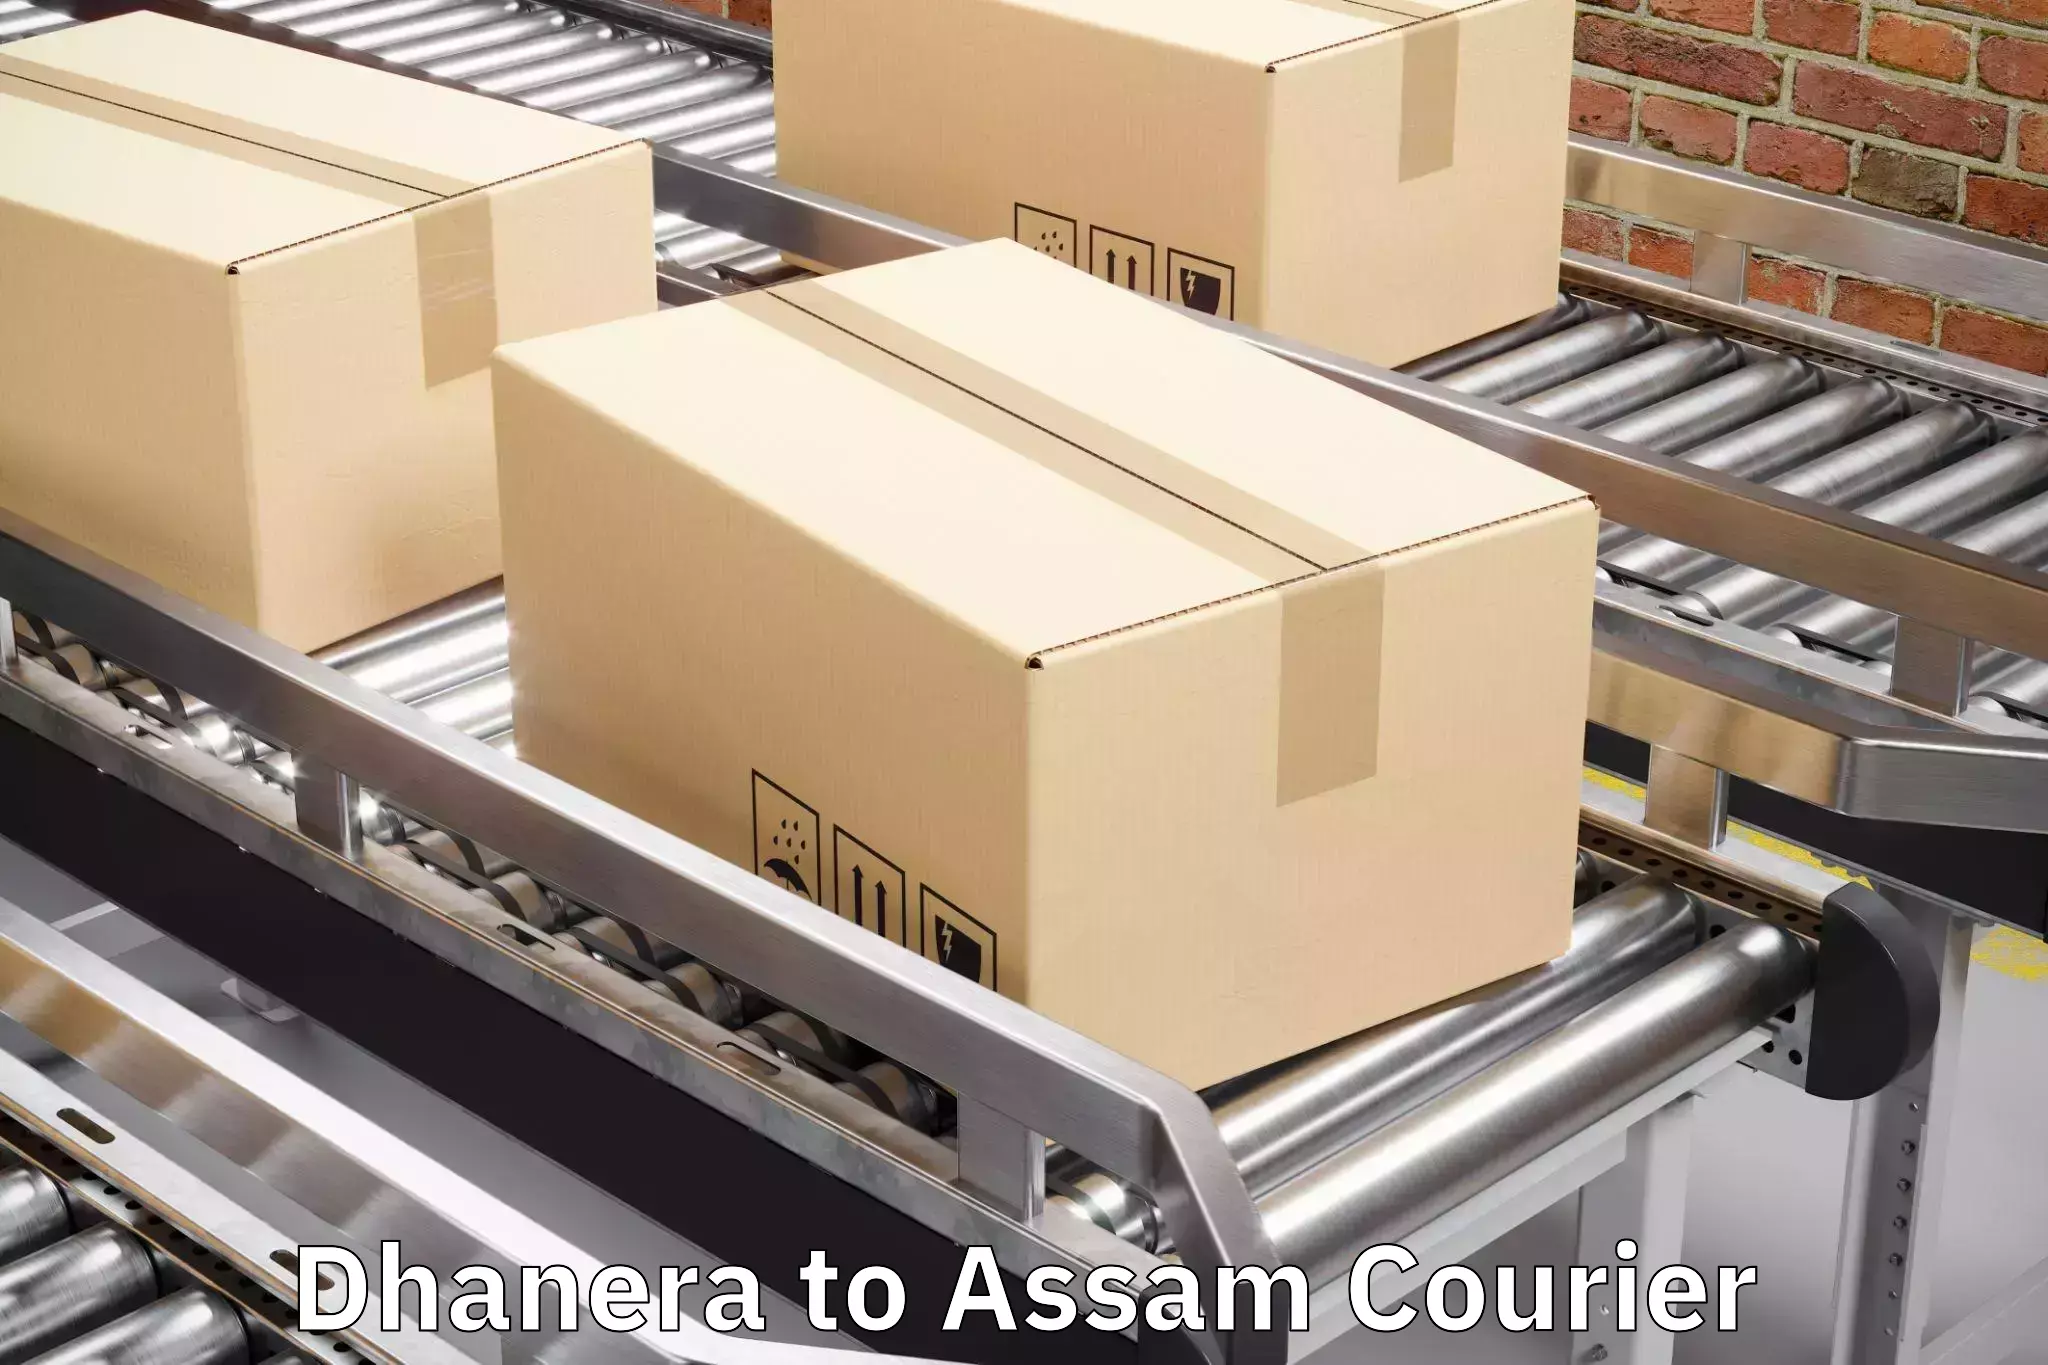 Baggage transport network Dhanera to Assam